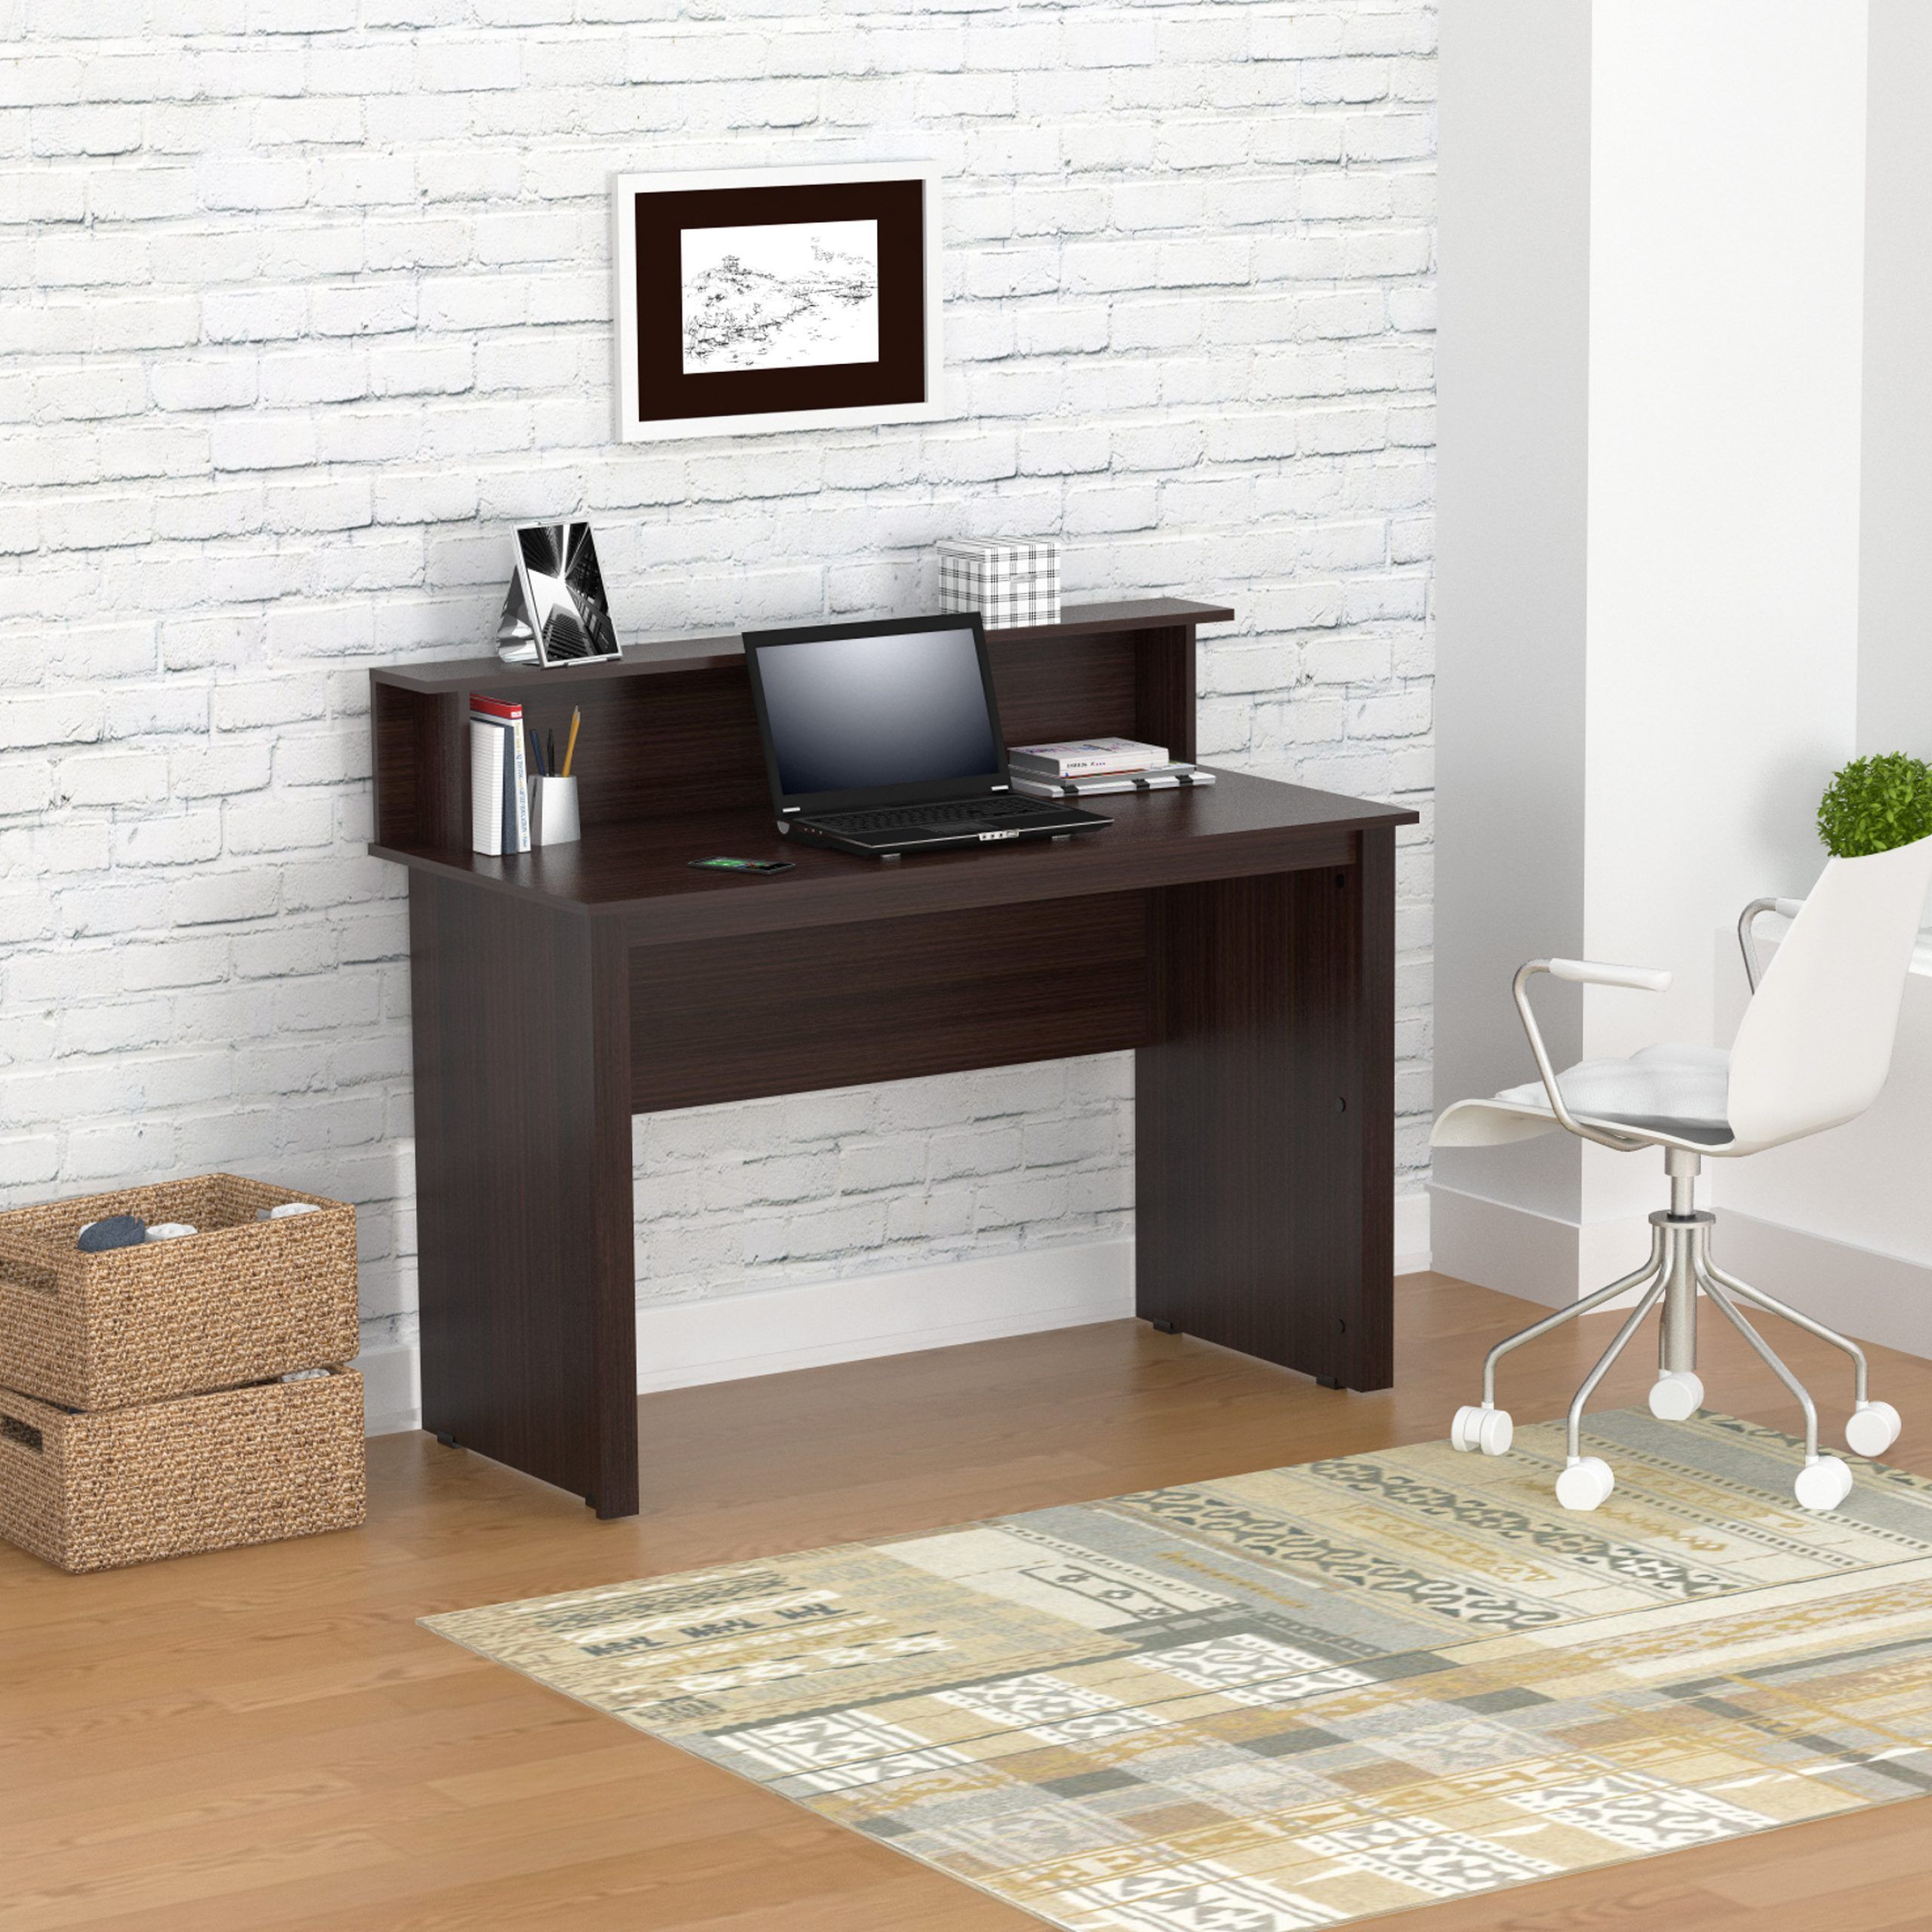 Inval Modern Espresso Wengue Writing Desk With Hutch – Walmart For Modern Office Writing Desks (View 10 of 15)